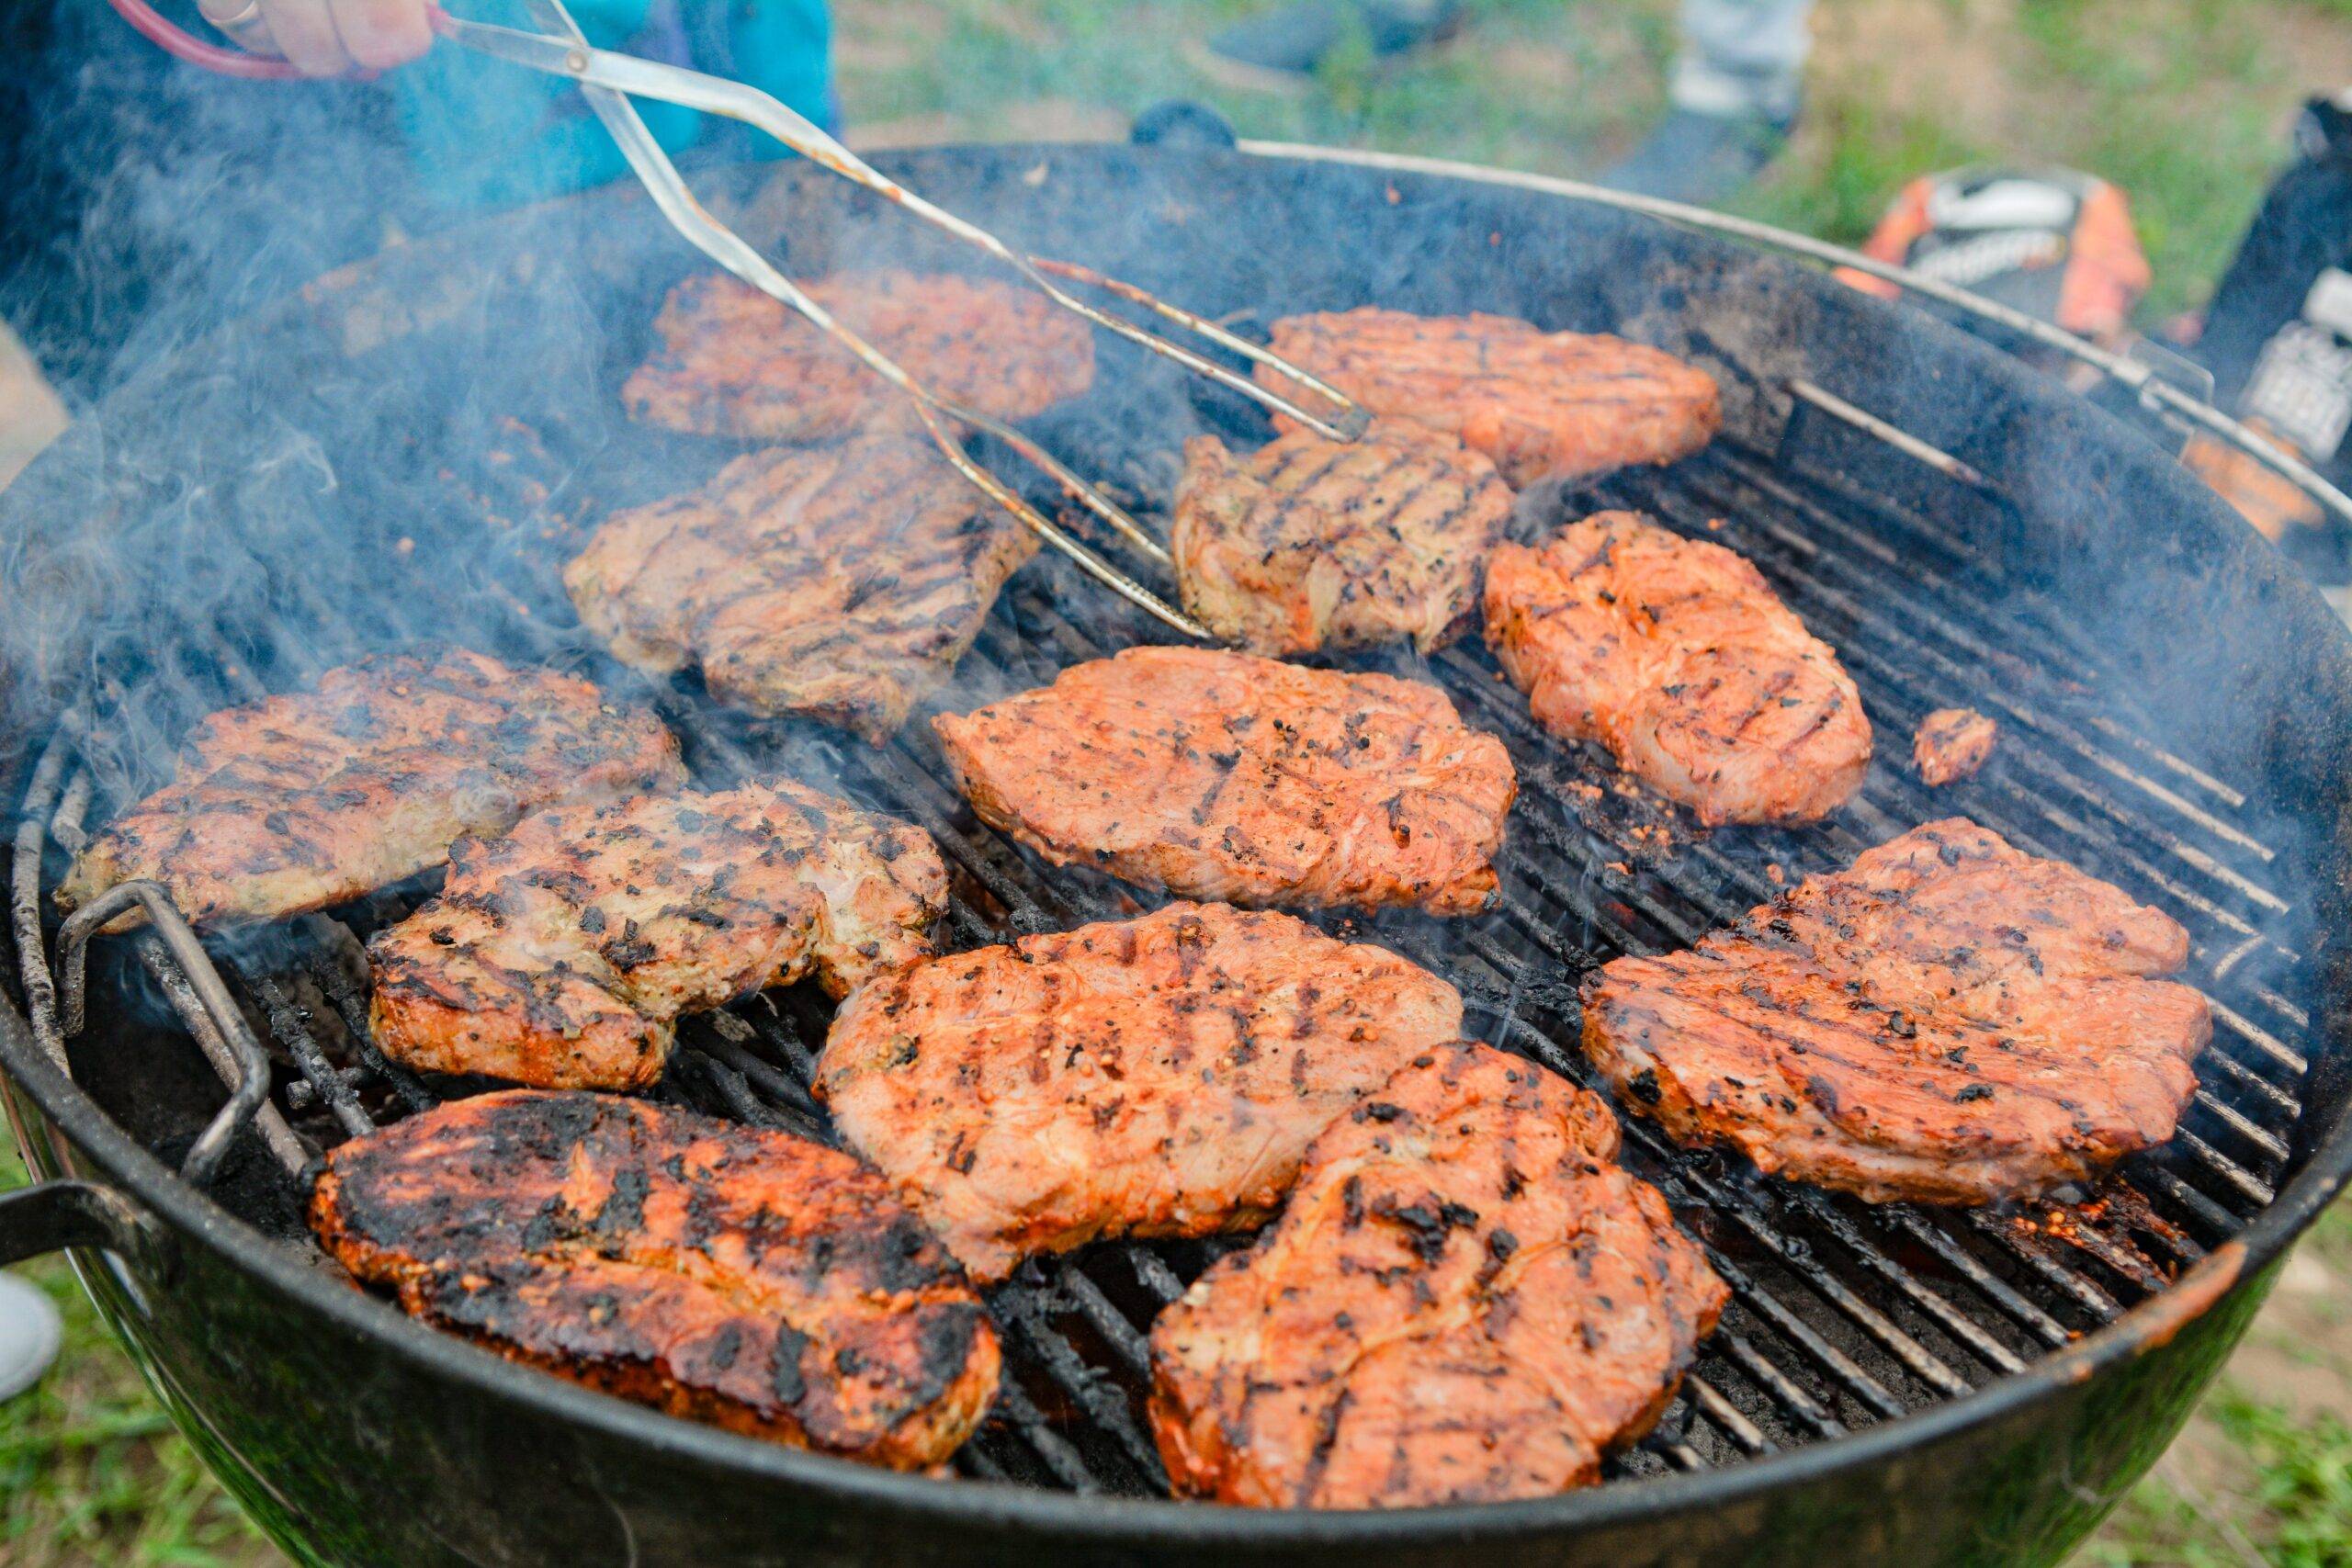 What Are the Best Techniques to Grill Pork Chops